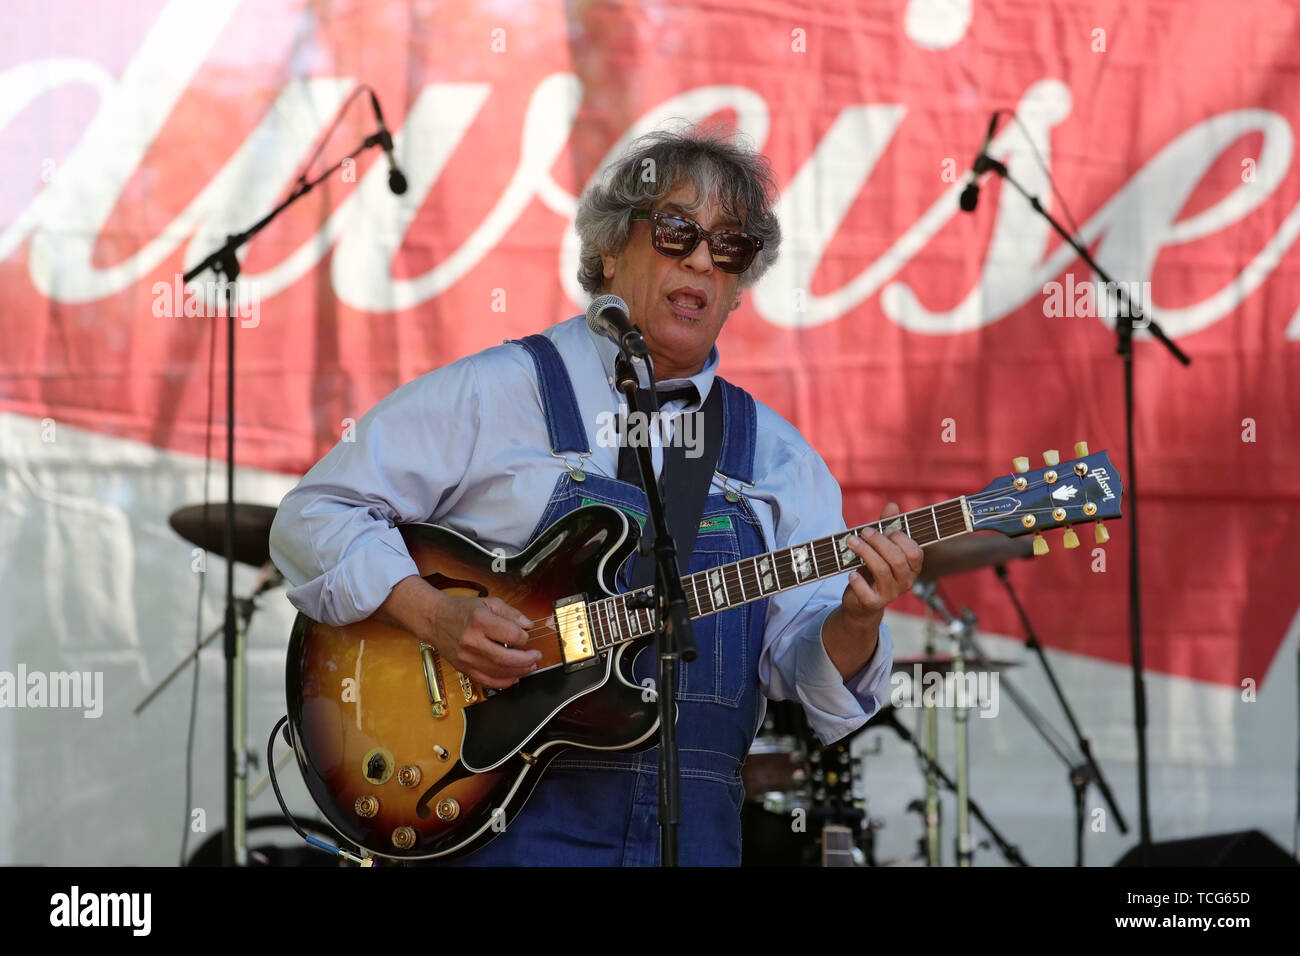 Chicago, USA. 7th June, 2019. Blues guitarist Chris Cain performs during the yearly Chicago Blues Festival in Chicago, the United States, on June 7, 2019. The 36th Chicago Blues Festival kicked off Friday at Millennium Park in downtown Chicago. The three-day music festival is free and open to visitors. Credit: Wang Ping/Xinhua/Alamy Live News Stock Photo